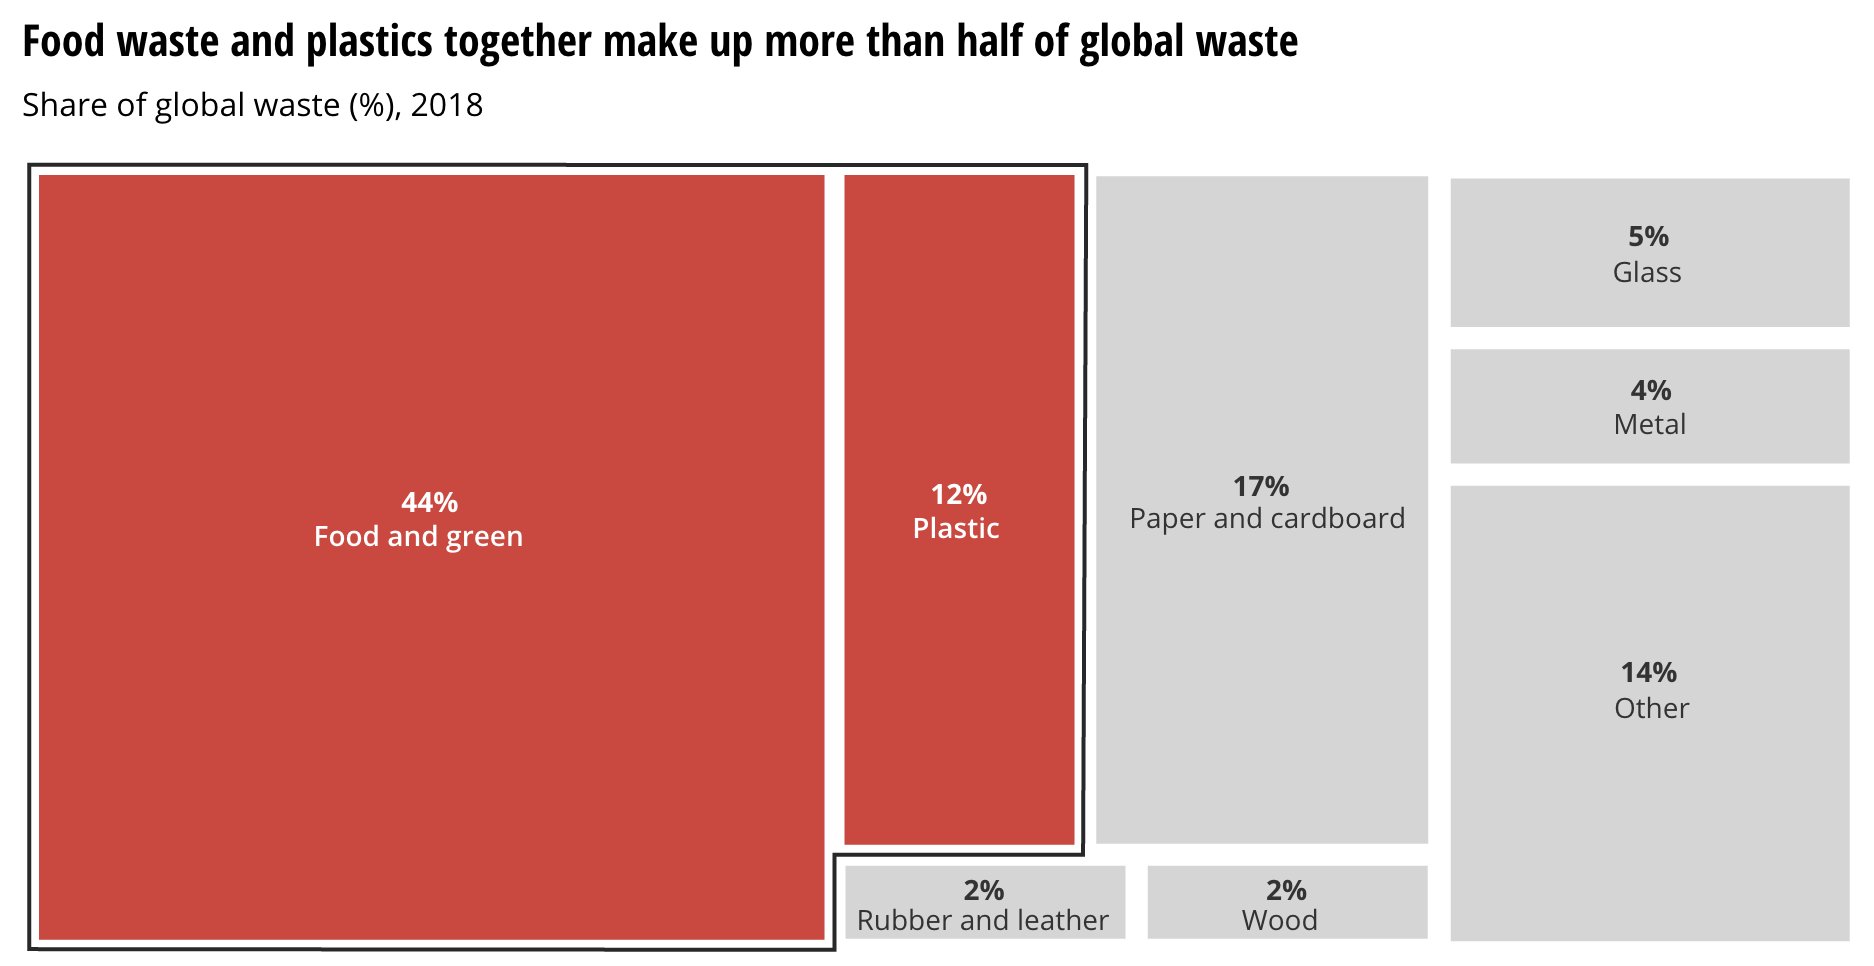 A treemap showing the composition of global waste. Food and green (44%) and plastic (12%) are highlighted in red, the other categories are in grey